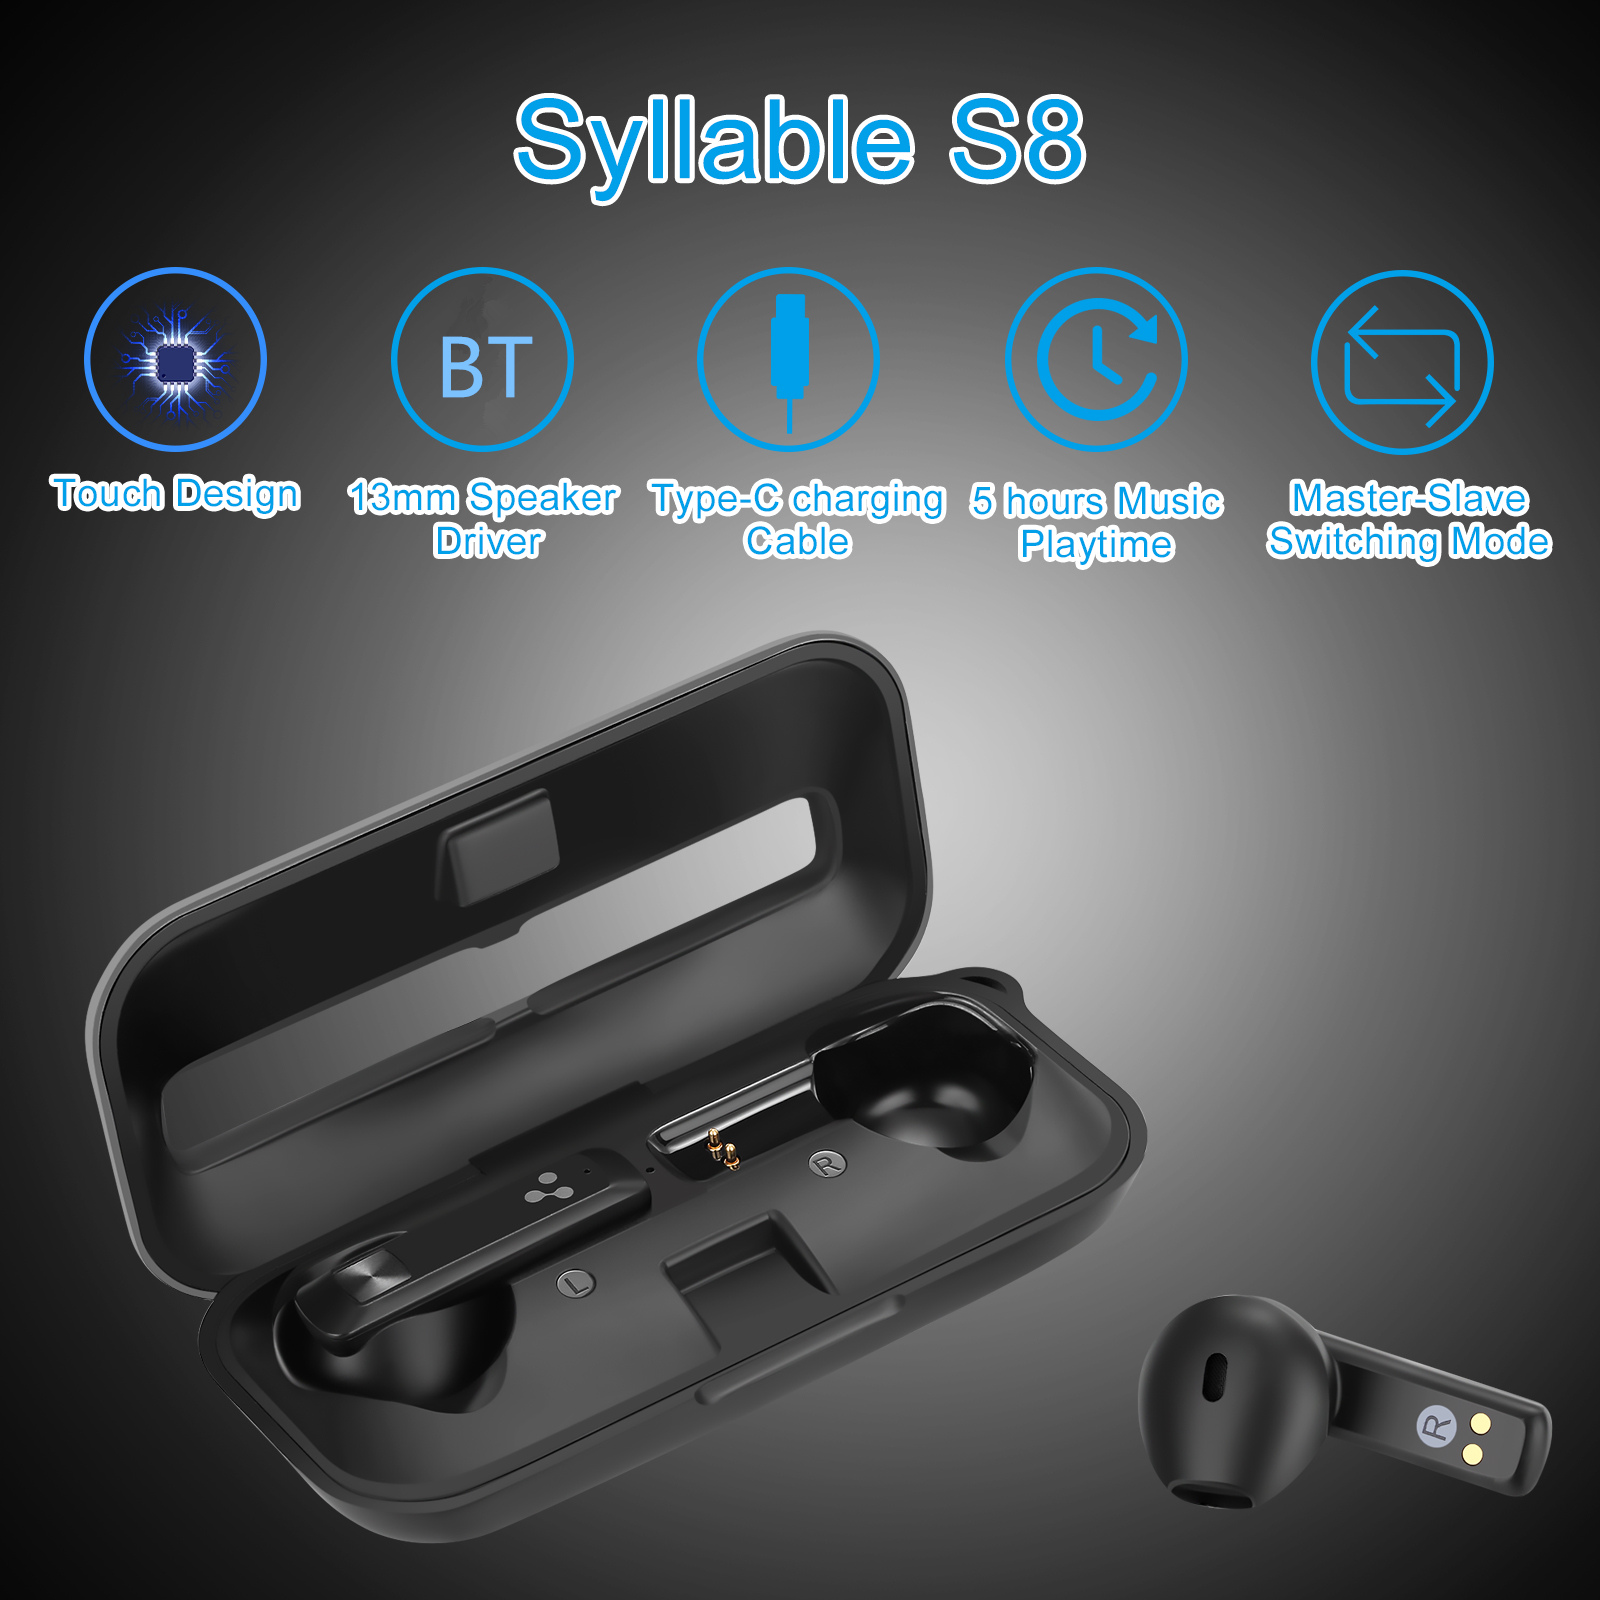 SYLLABLE-S8-TWS-bluetooth-Earphones-Master-Slave-Switching--13mm-Driver-Stereo-bass-Earbuds-Headphon-1877090-2